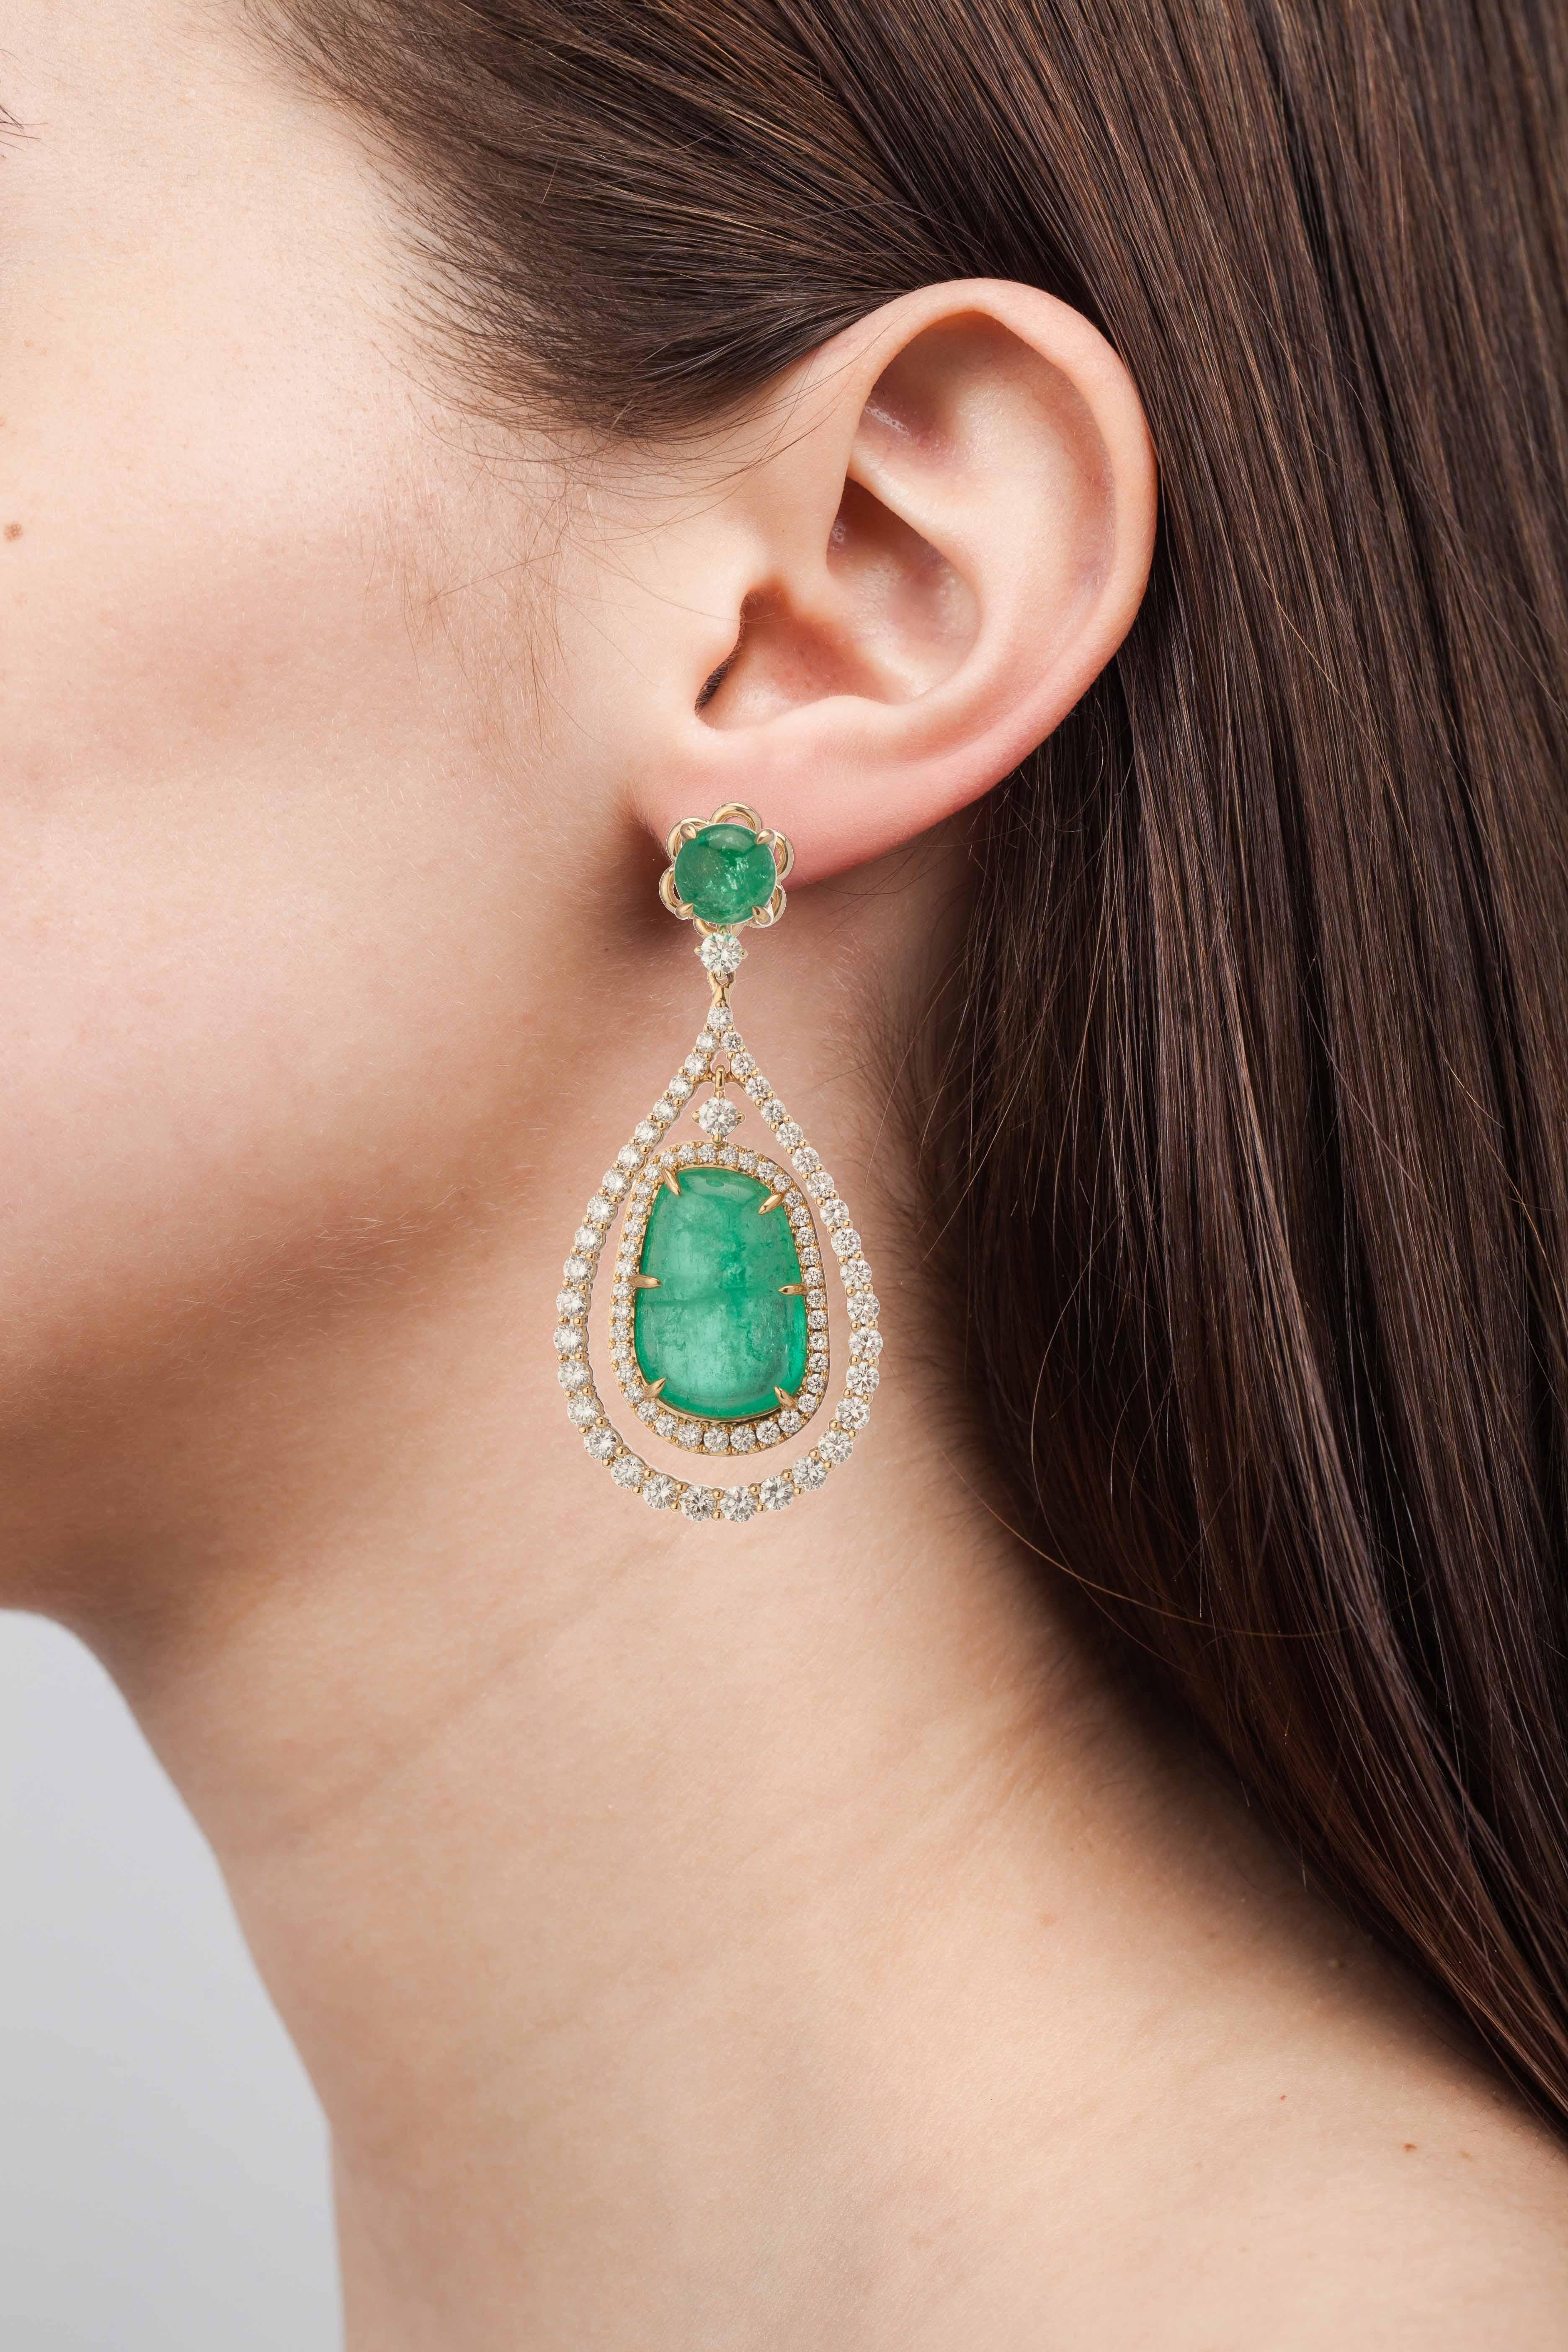 18 Karat yellow gold statement earrings set with 39.51 carats of Muzo Colombian emeralds and a single halo of round brilliant diamonds weighting 5.61 carats.

Muzo Emerald Colombia Heritage Verity Earrings set with 39.51 carats Emerald.

Verity is a